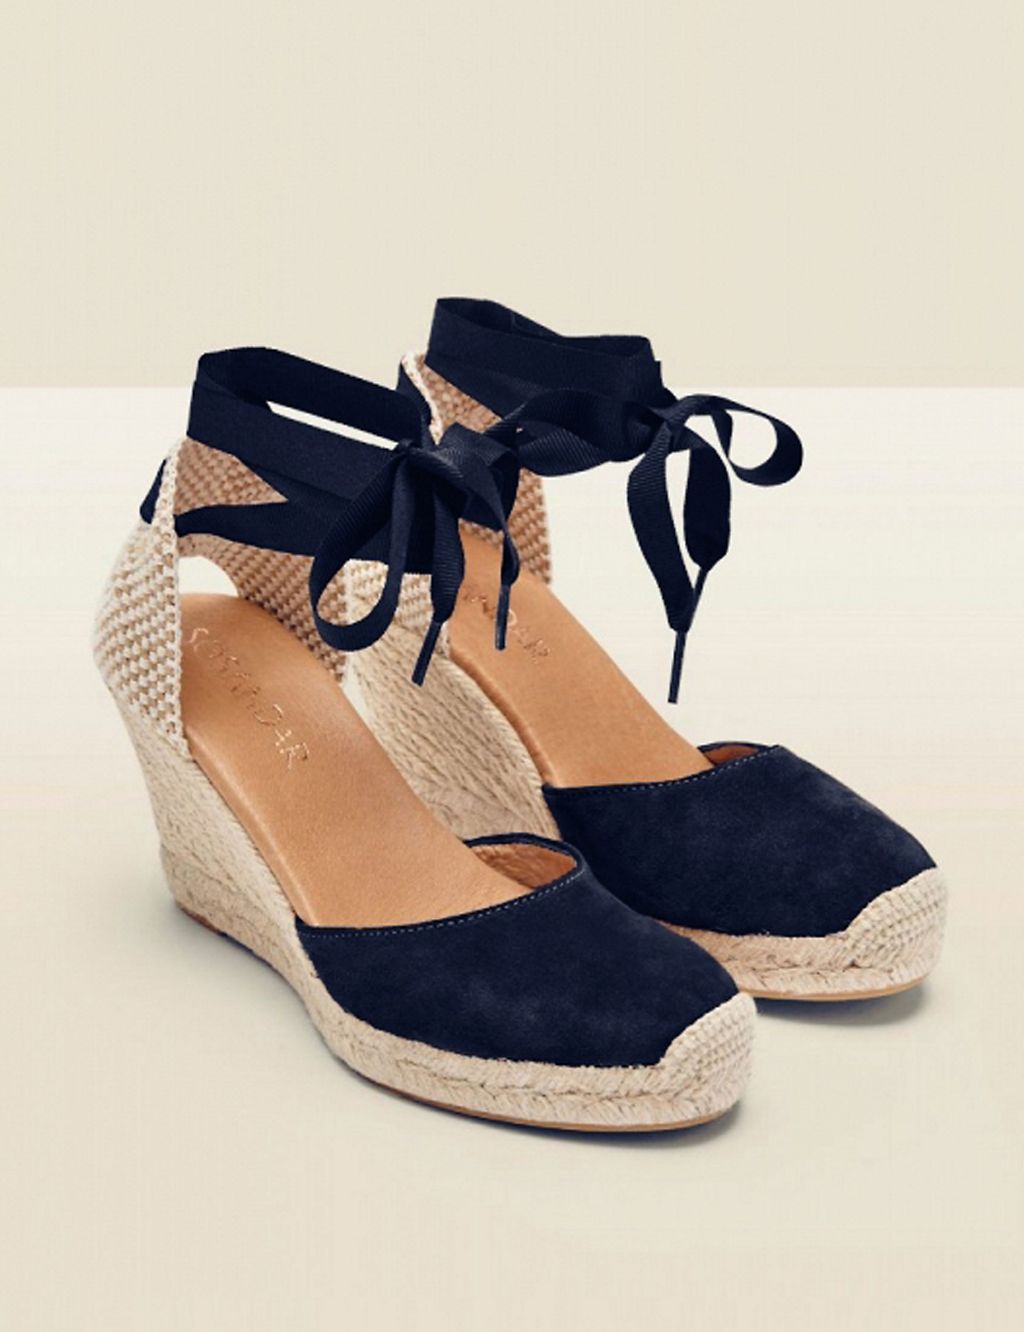 Suede Ankle Strap Wedge Espadrilles 1 of 3